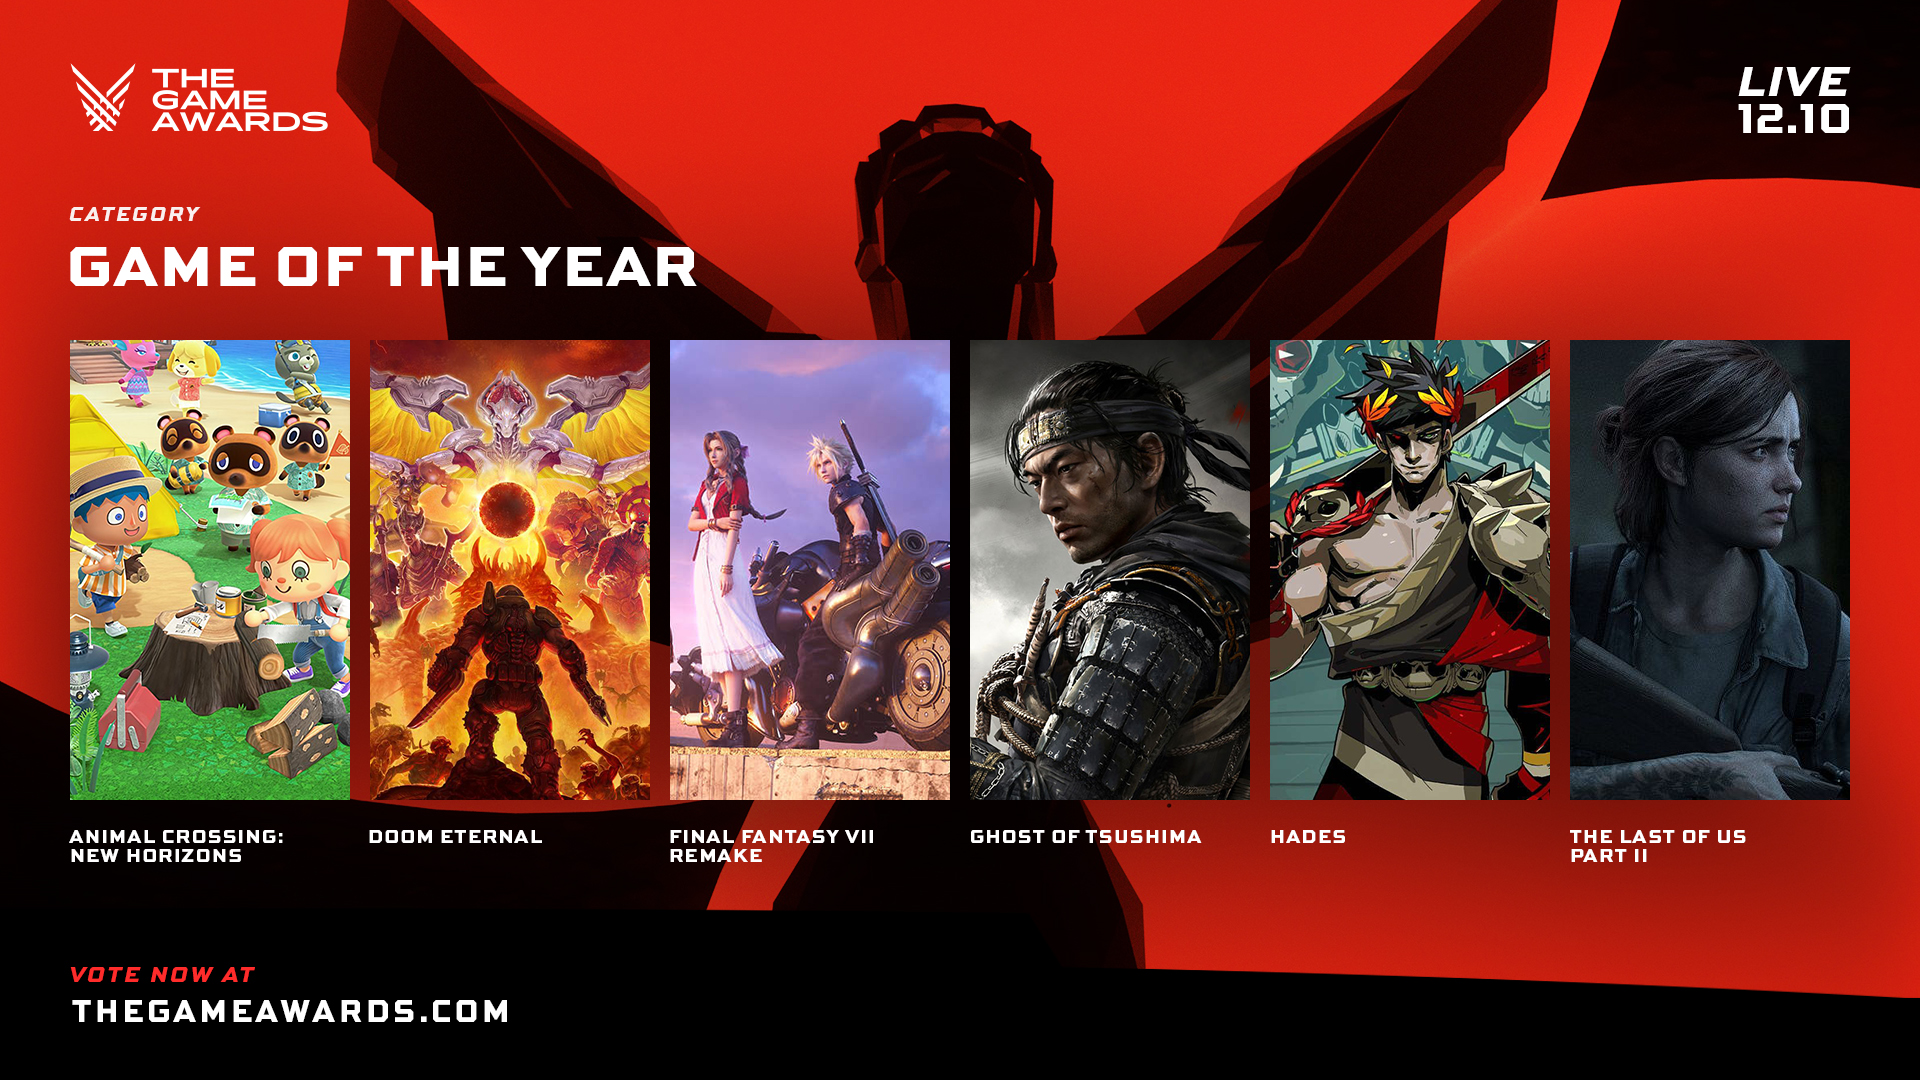 game of the year animal crossing doom eternal final fantasy 7 ghost of tsushima hades the last of us part II